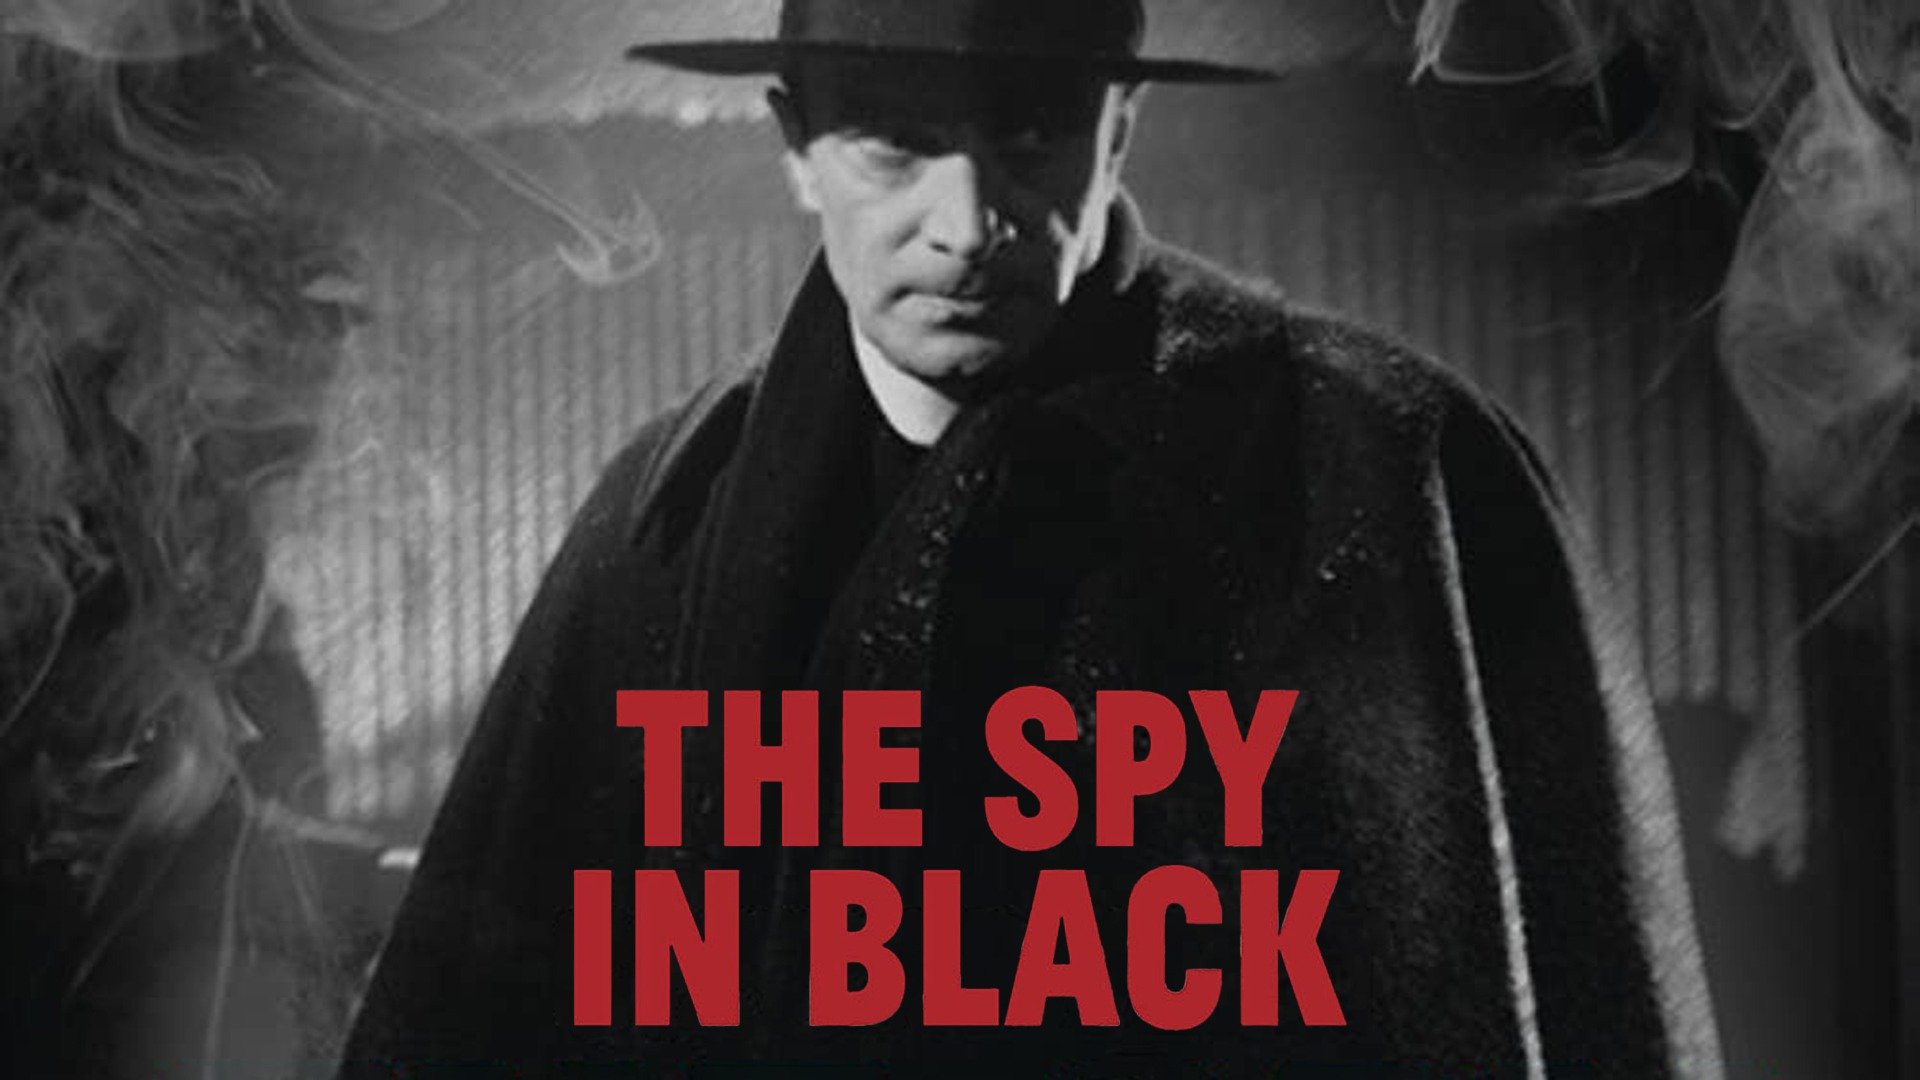 44-facts-about-the-movie-the-spy-in-black